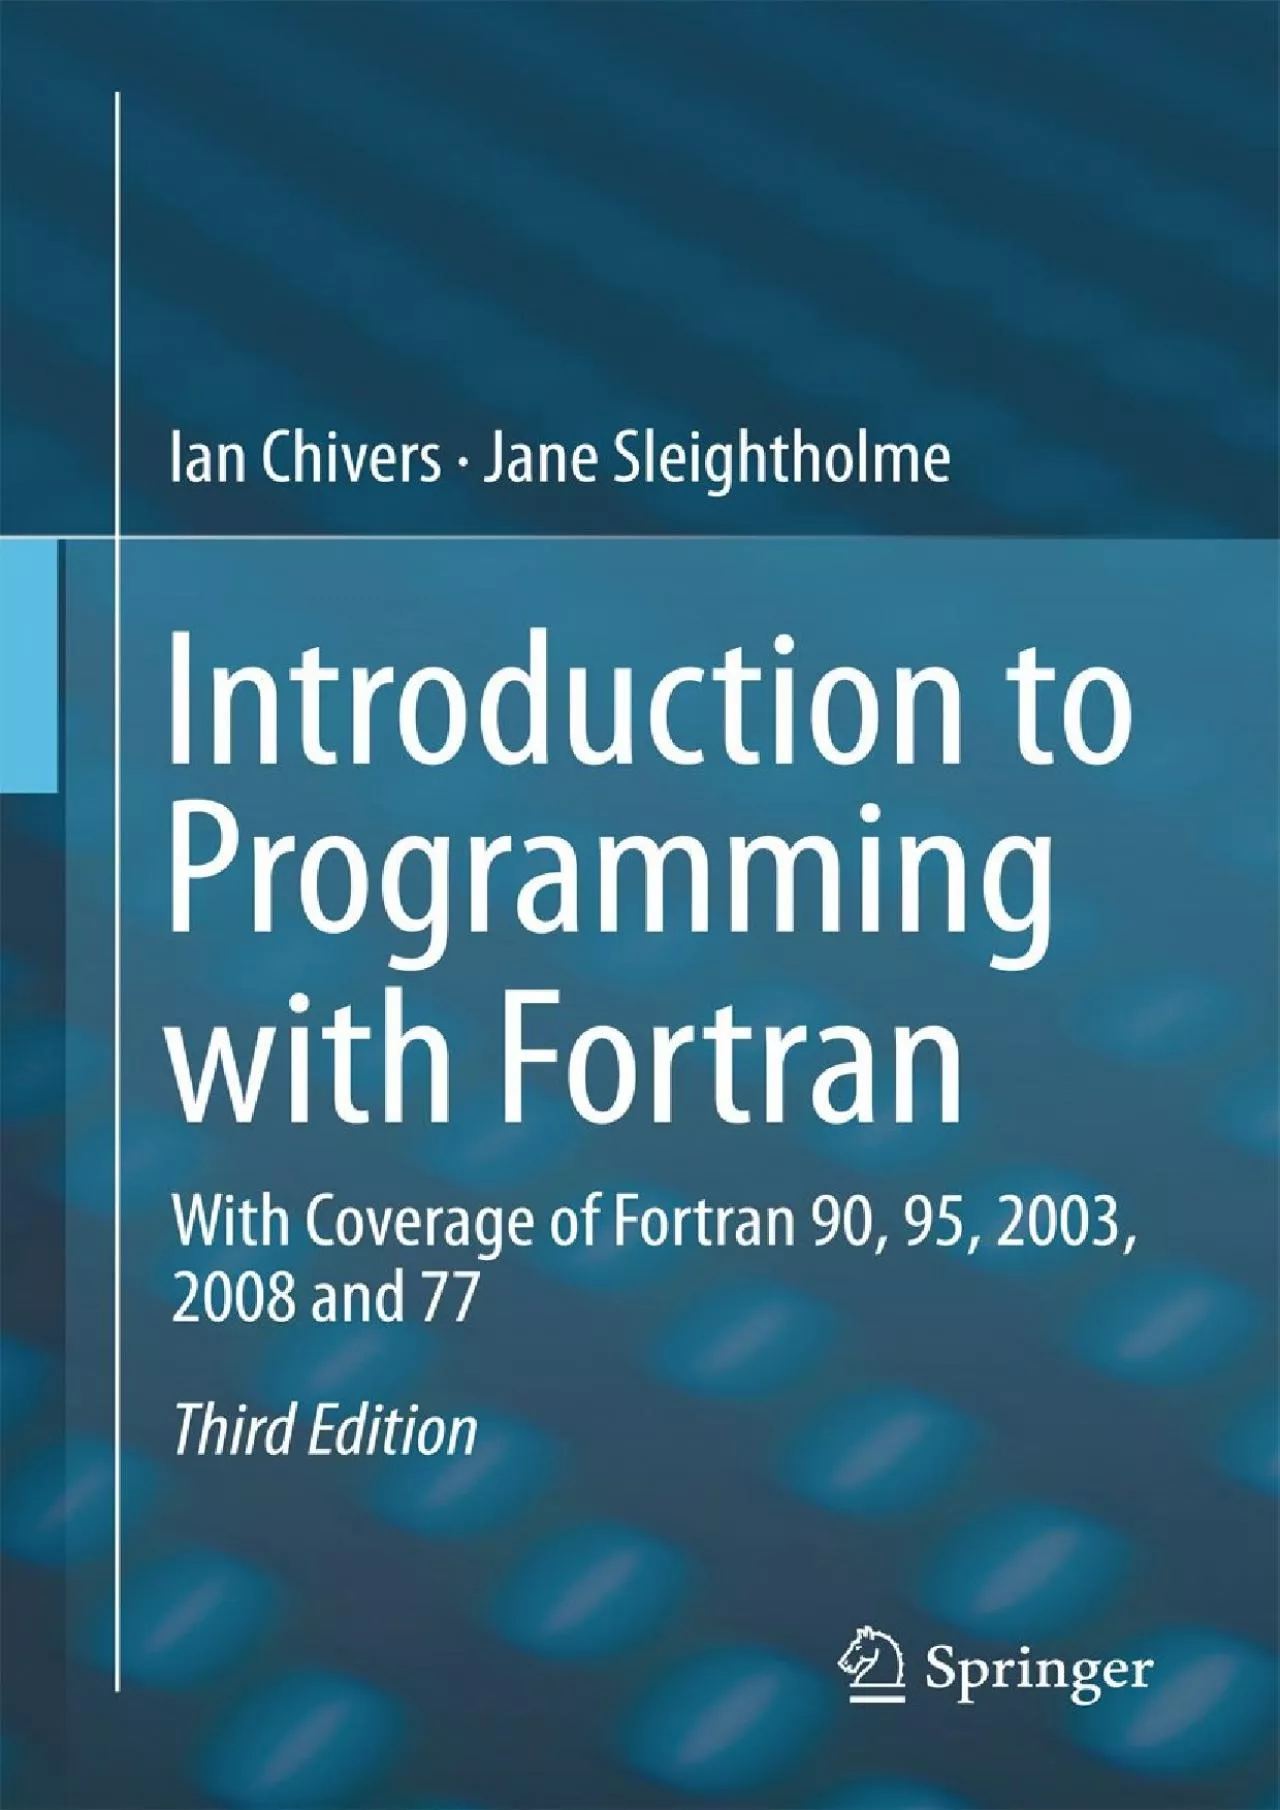 [eBOOK]-Introduction to Programming with Fortran: With Coverage of Fortran 90, 95, 2003,